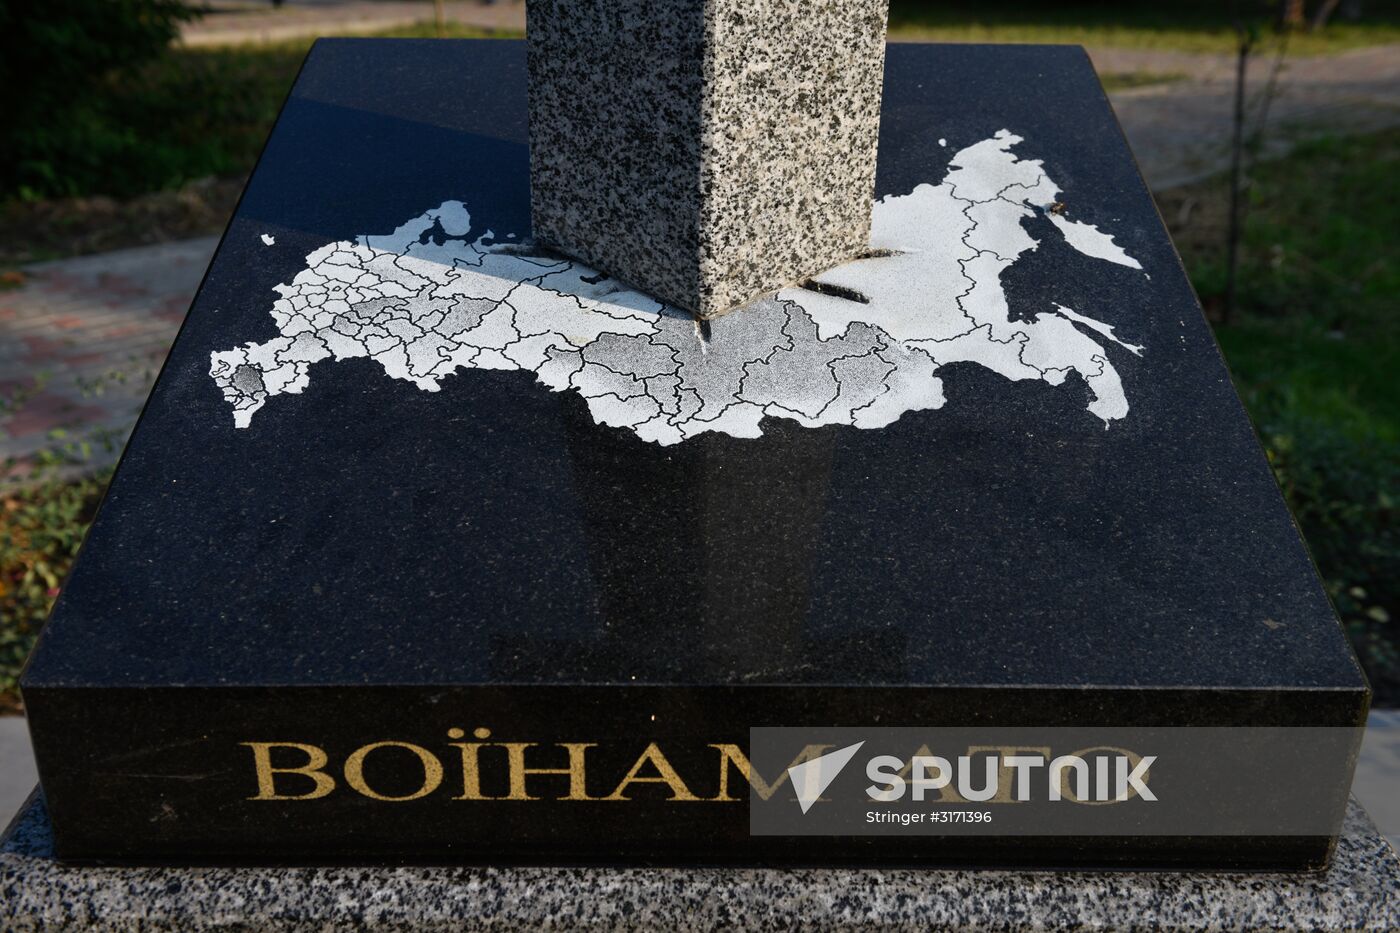 Monument unveiled in Kiev depicting sword stuck into map of Russia